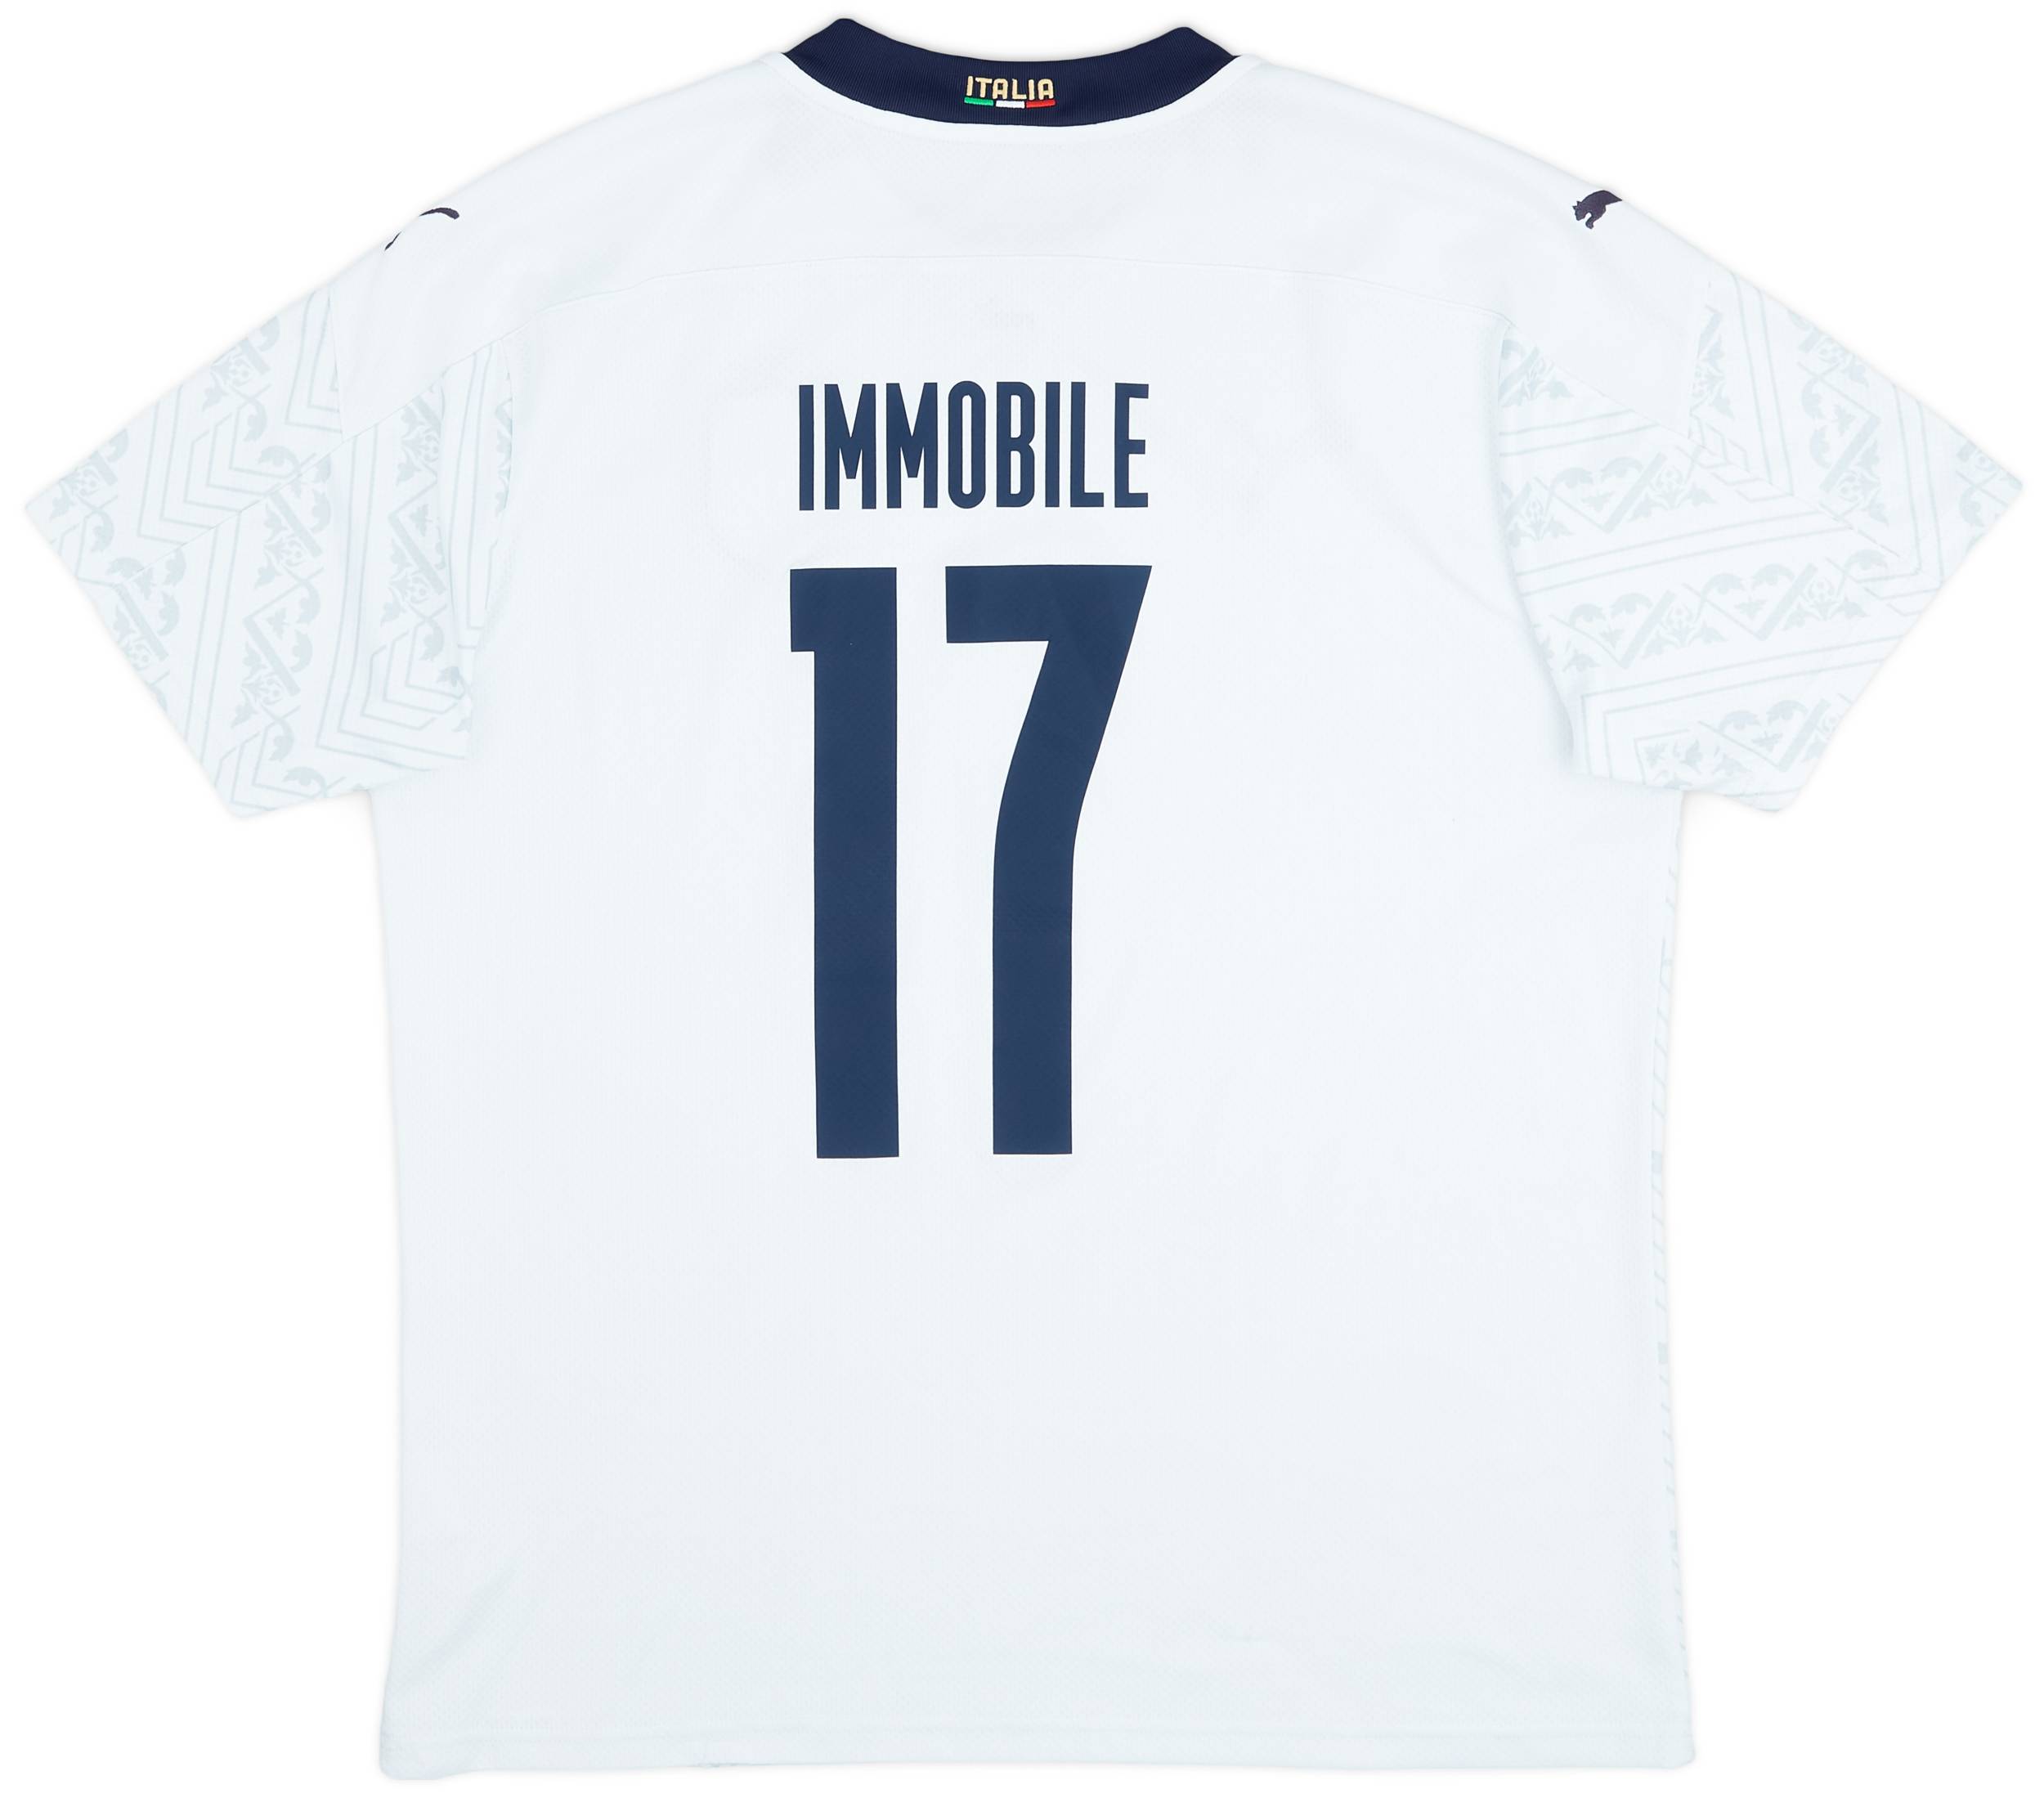 2020-21 Italy Away Shirt Immobile #17 - 8/10 - (L)